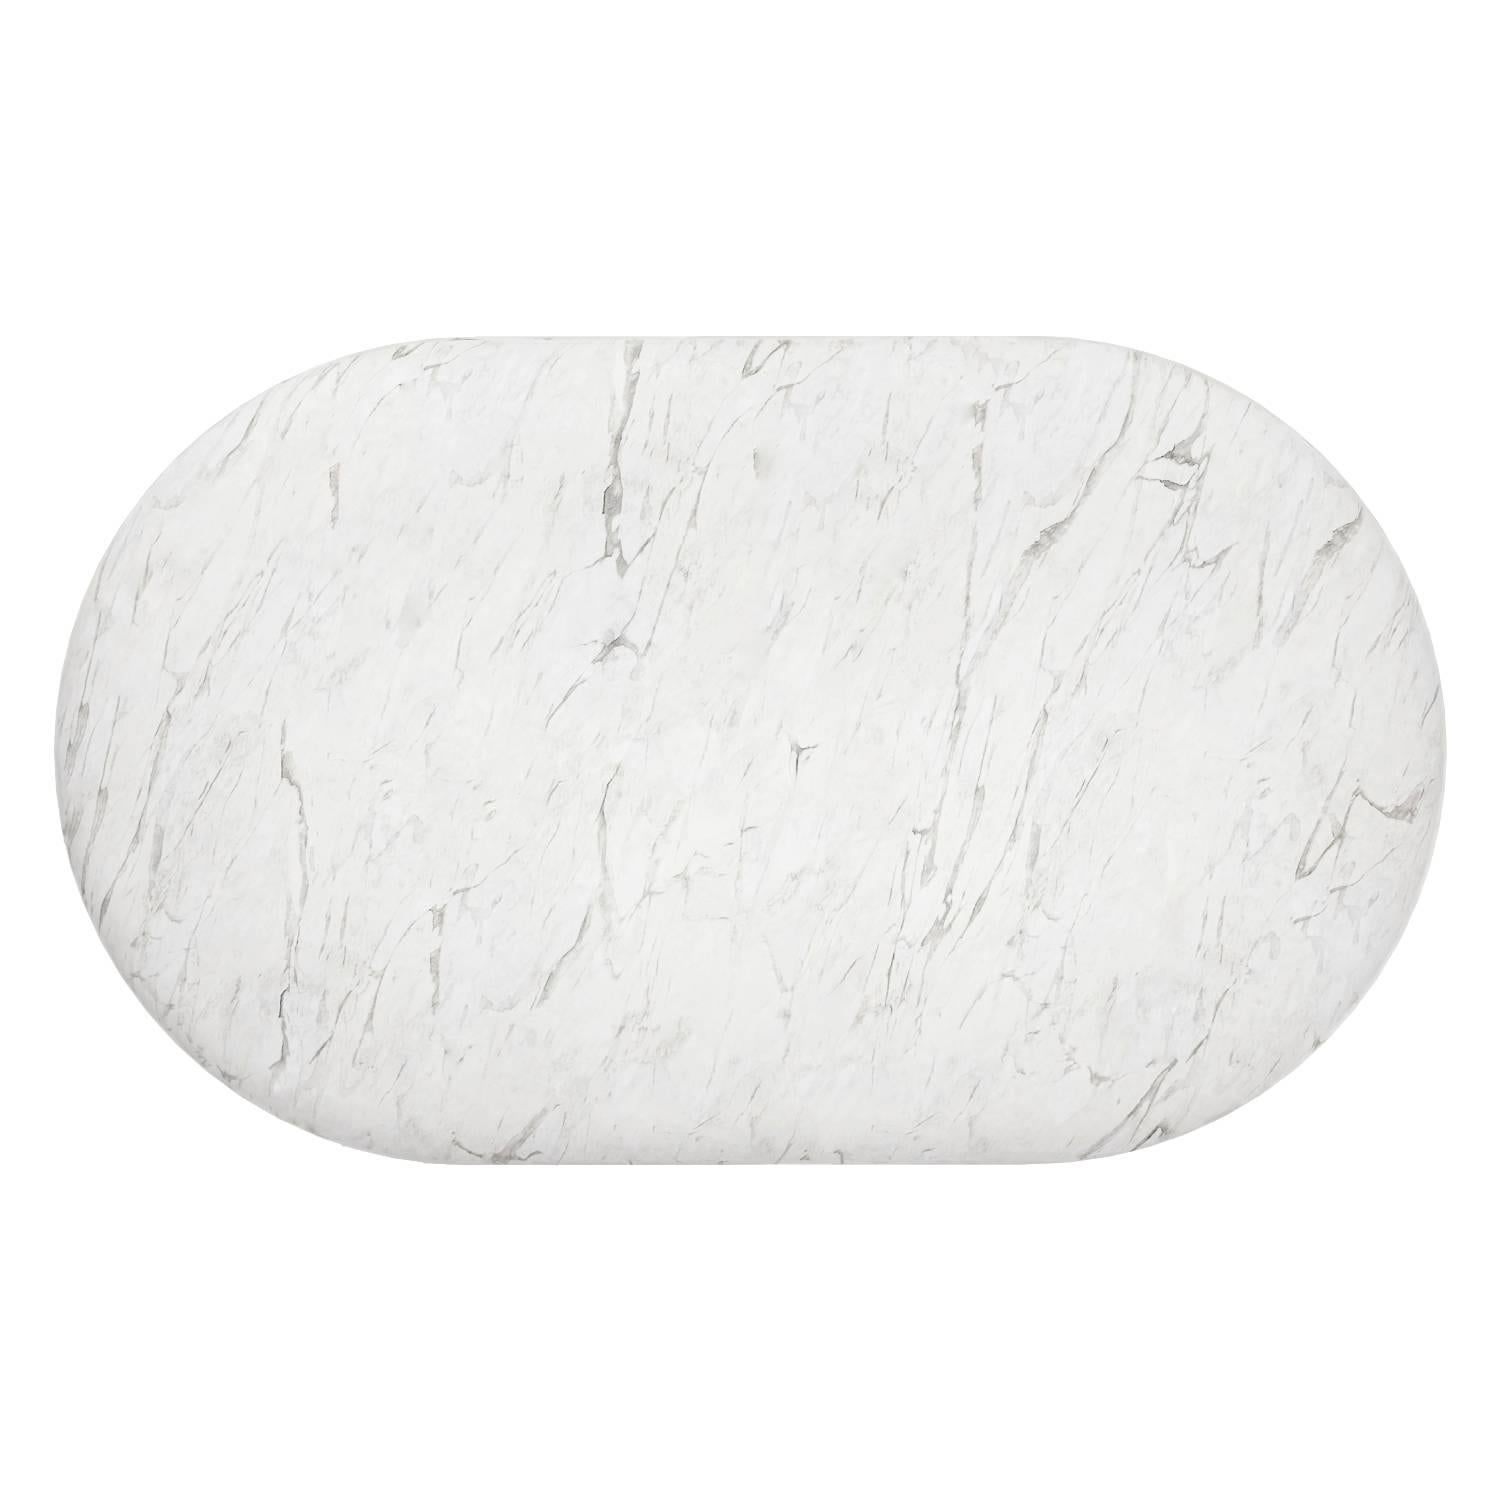 Italian Chloe White Carrara Marble Coffee Table by Fred and Juul For Sale